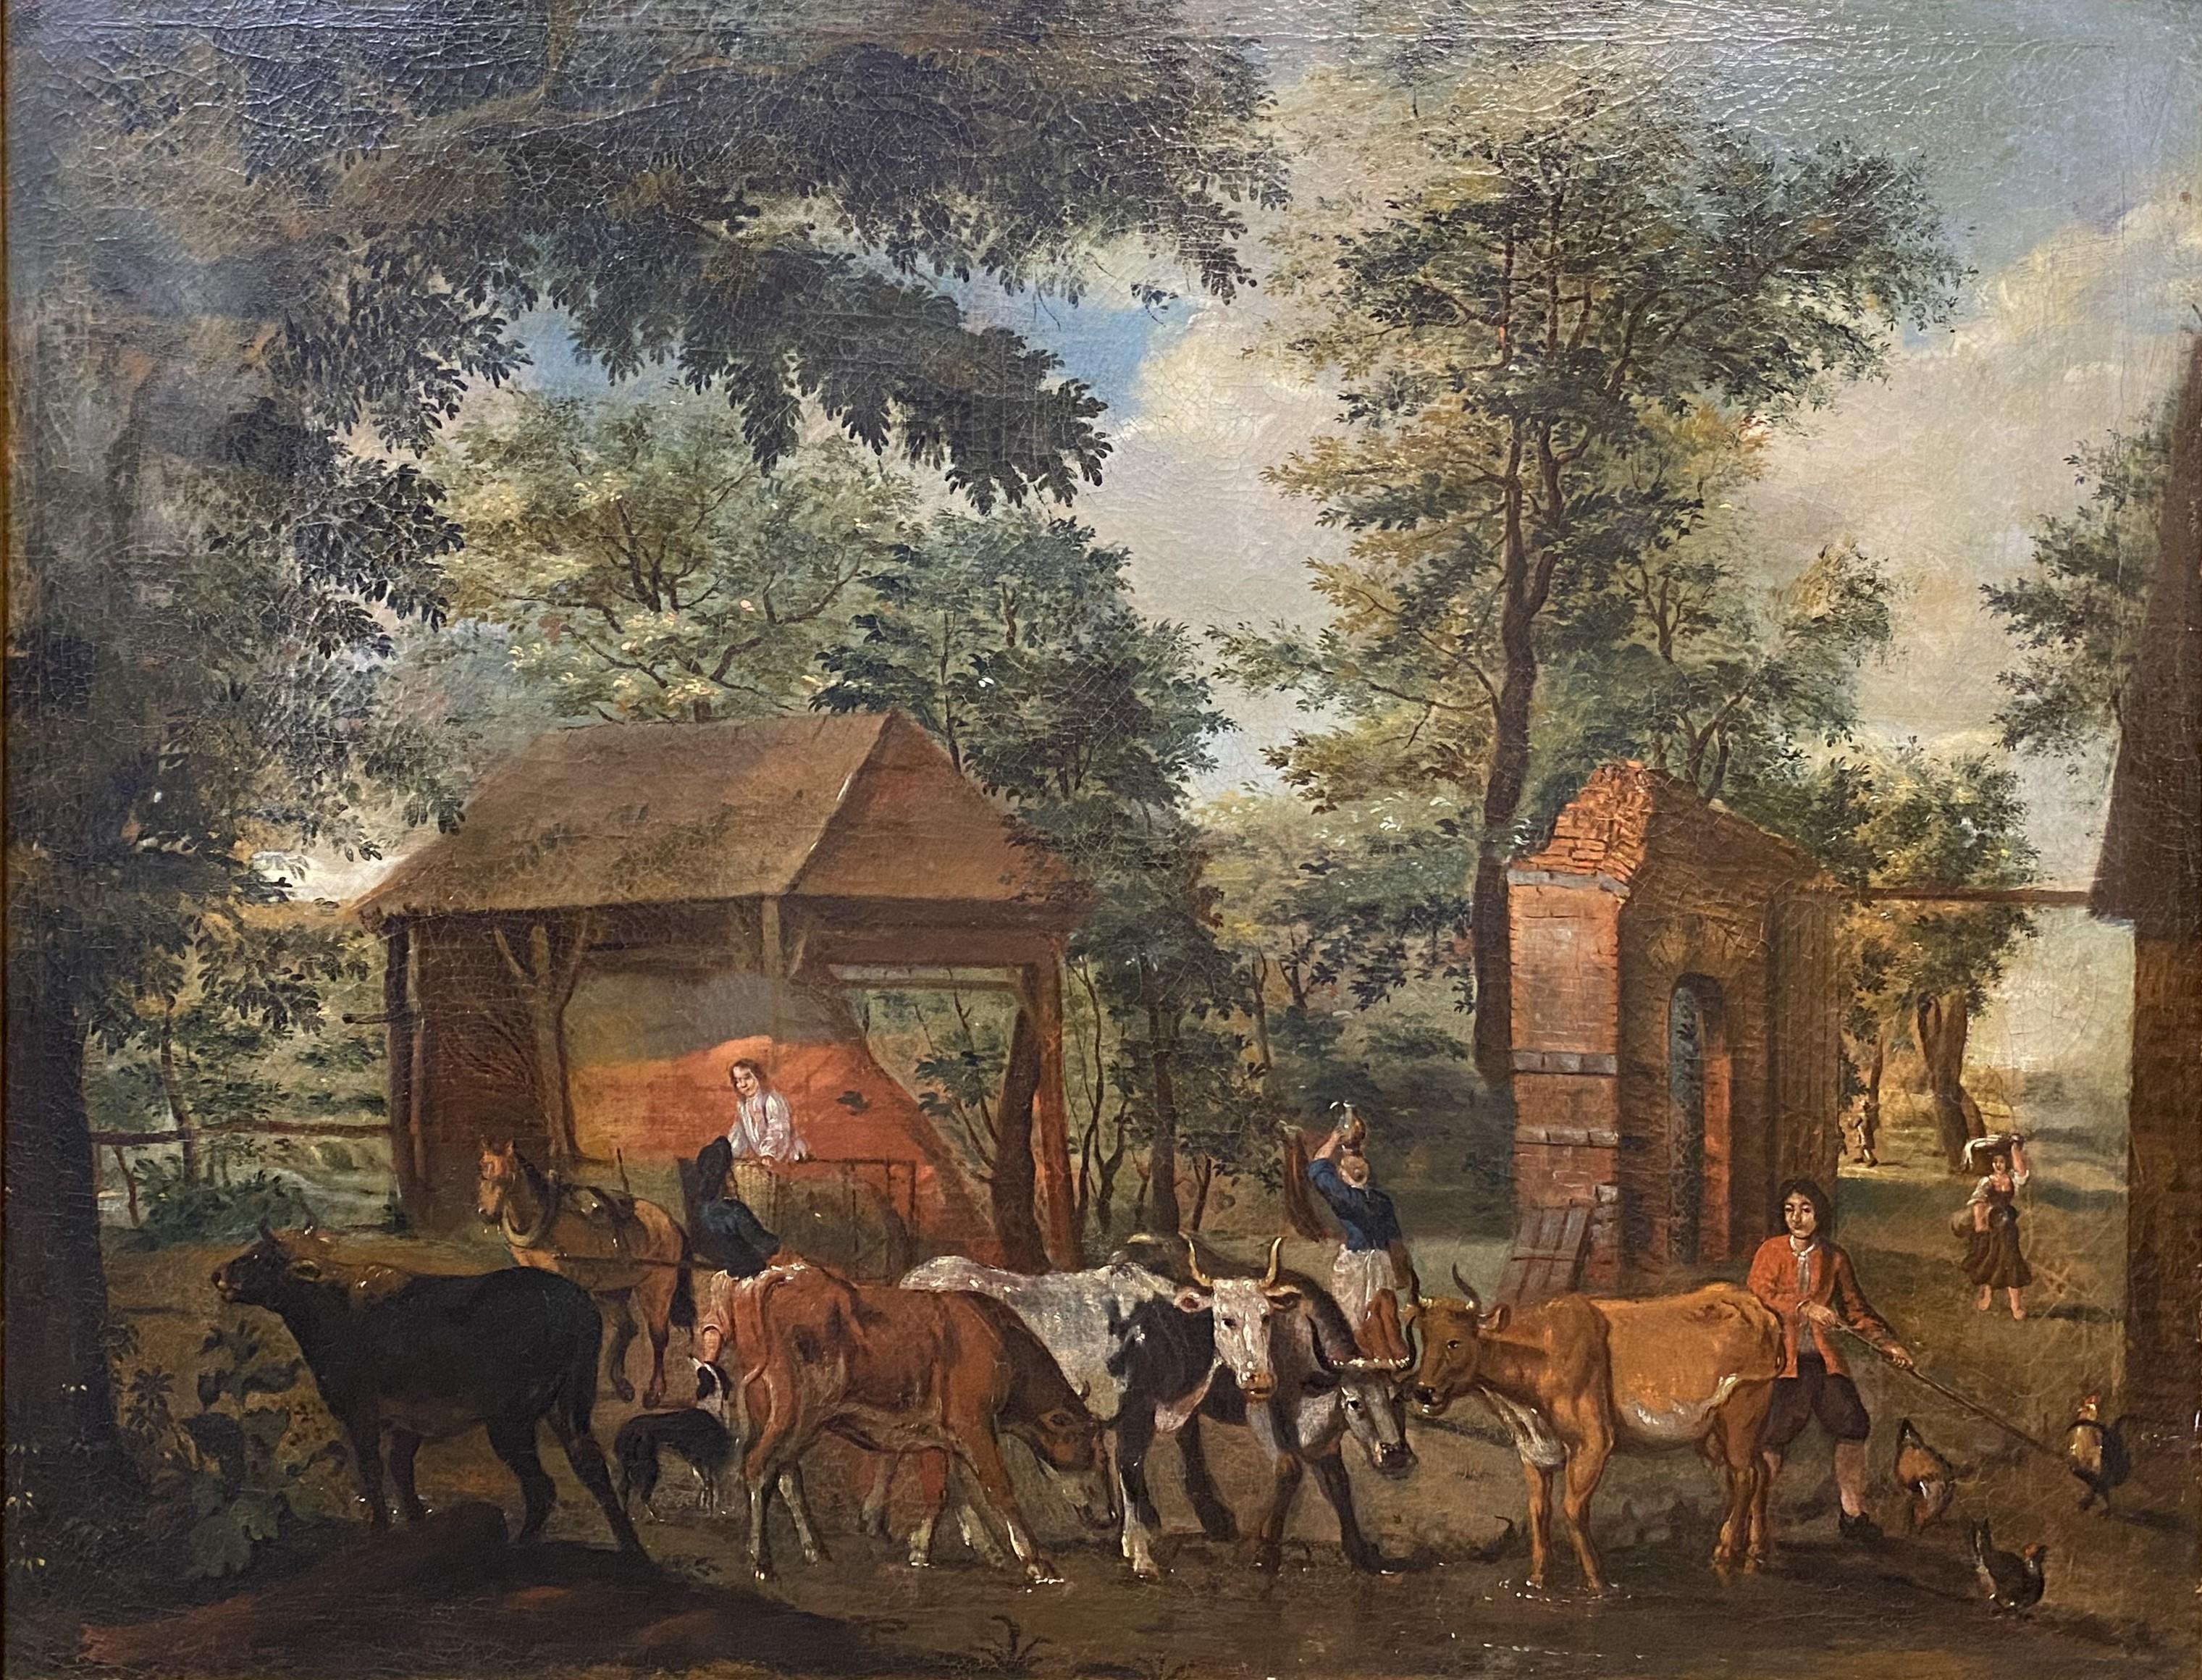 Landscape with Farm Animals & Figures - Painting by Continental School